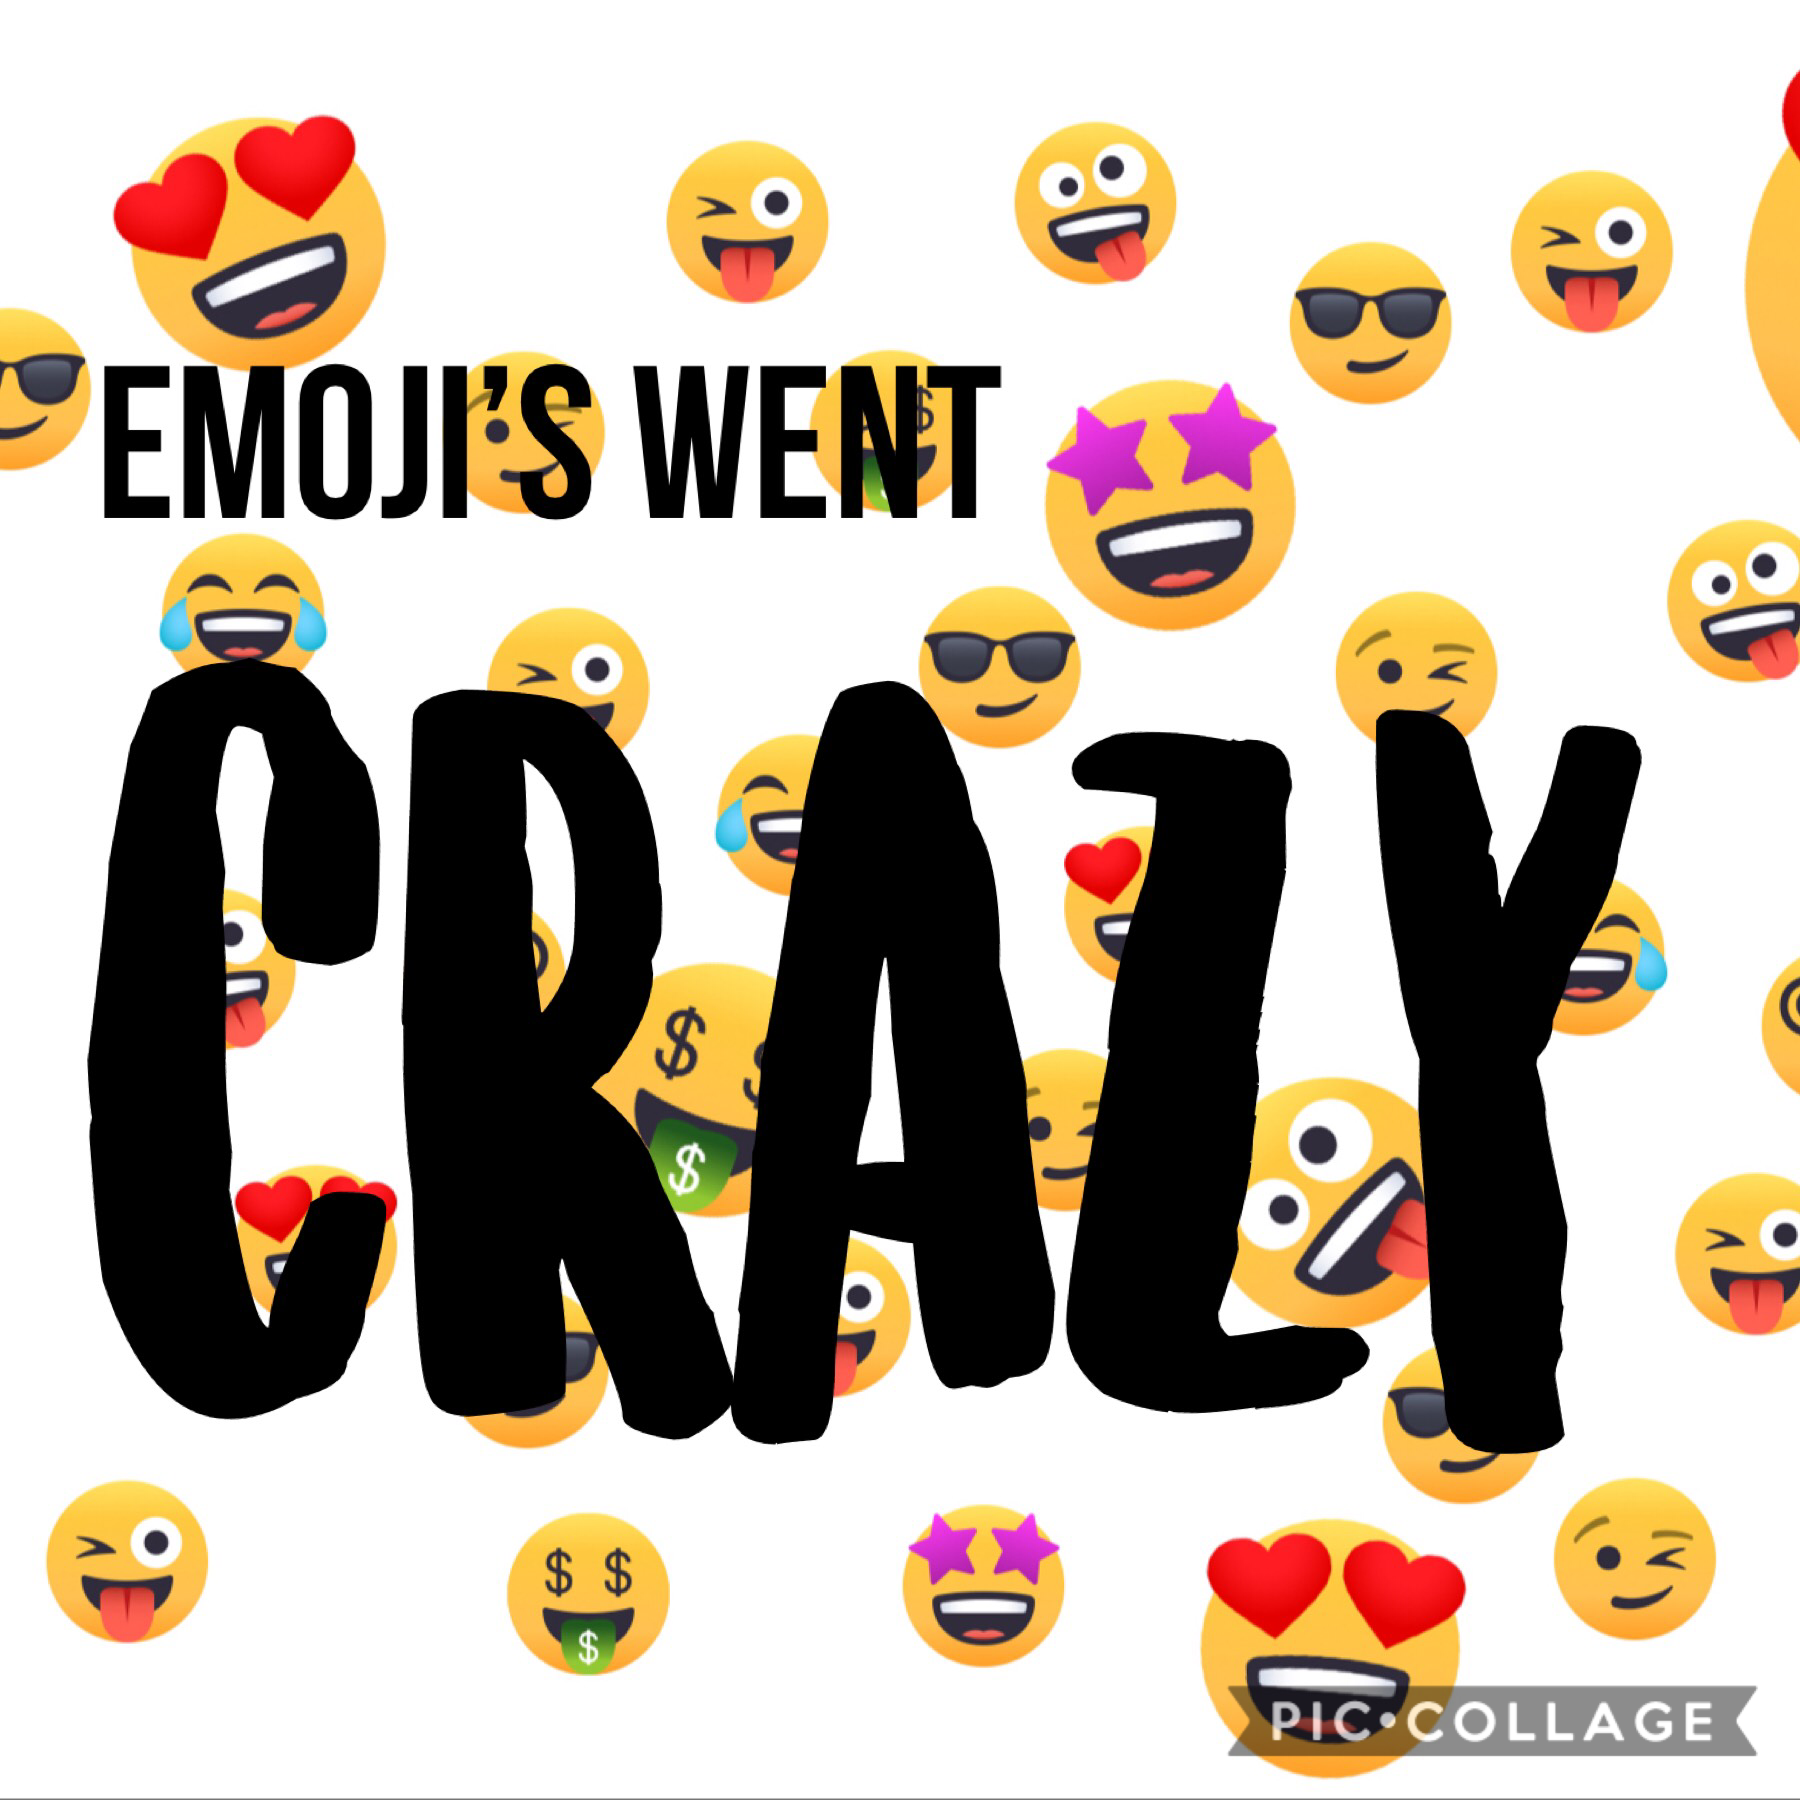 Whoever loves emoji’s like and follow and I will follow back